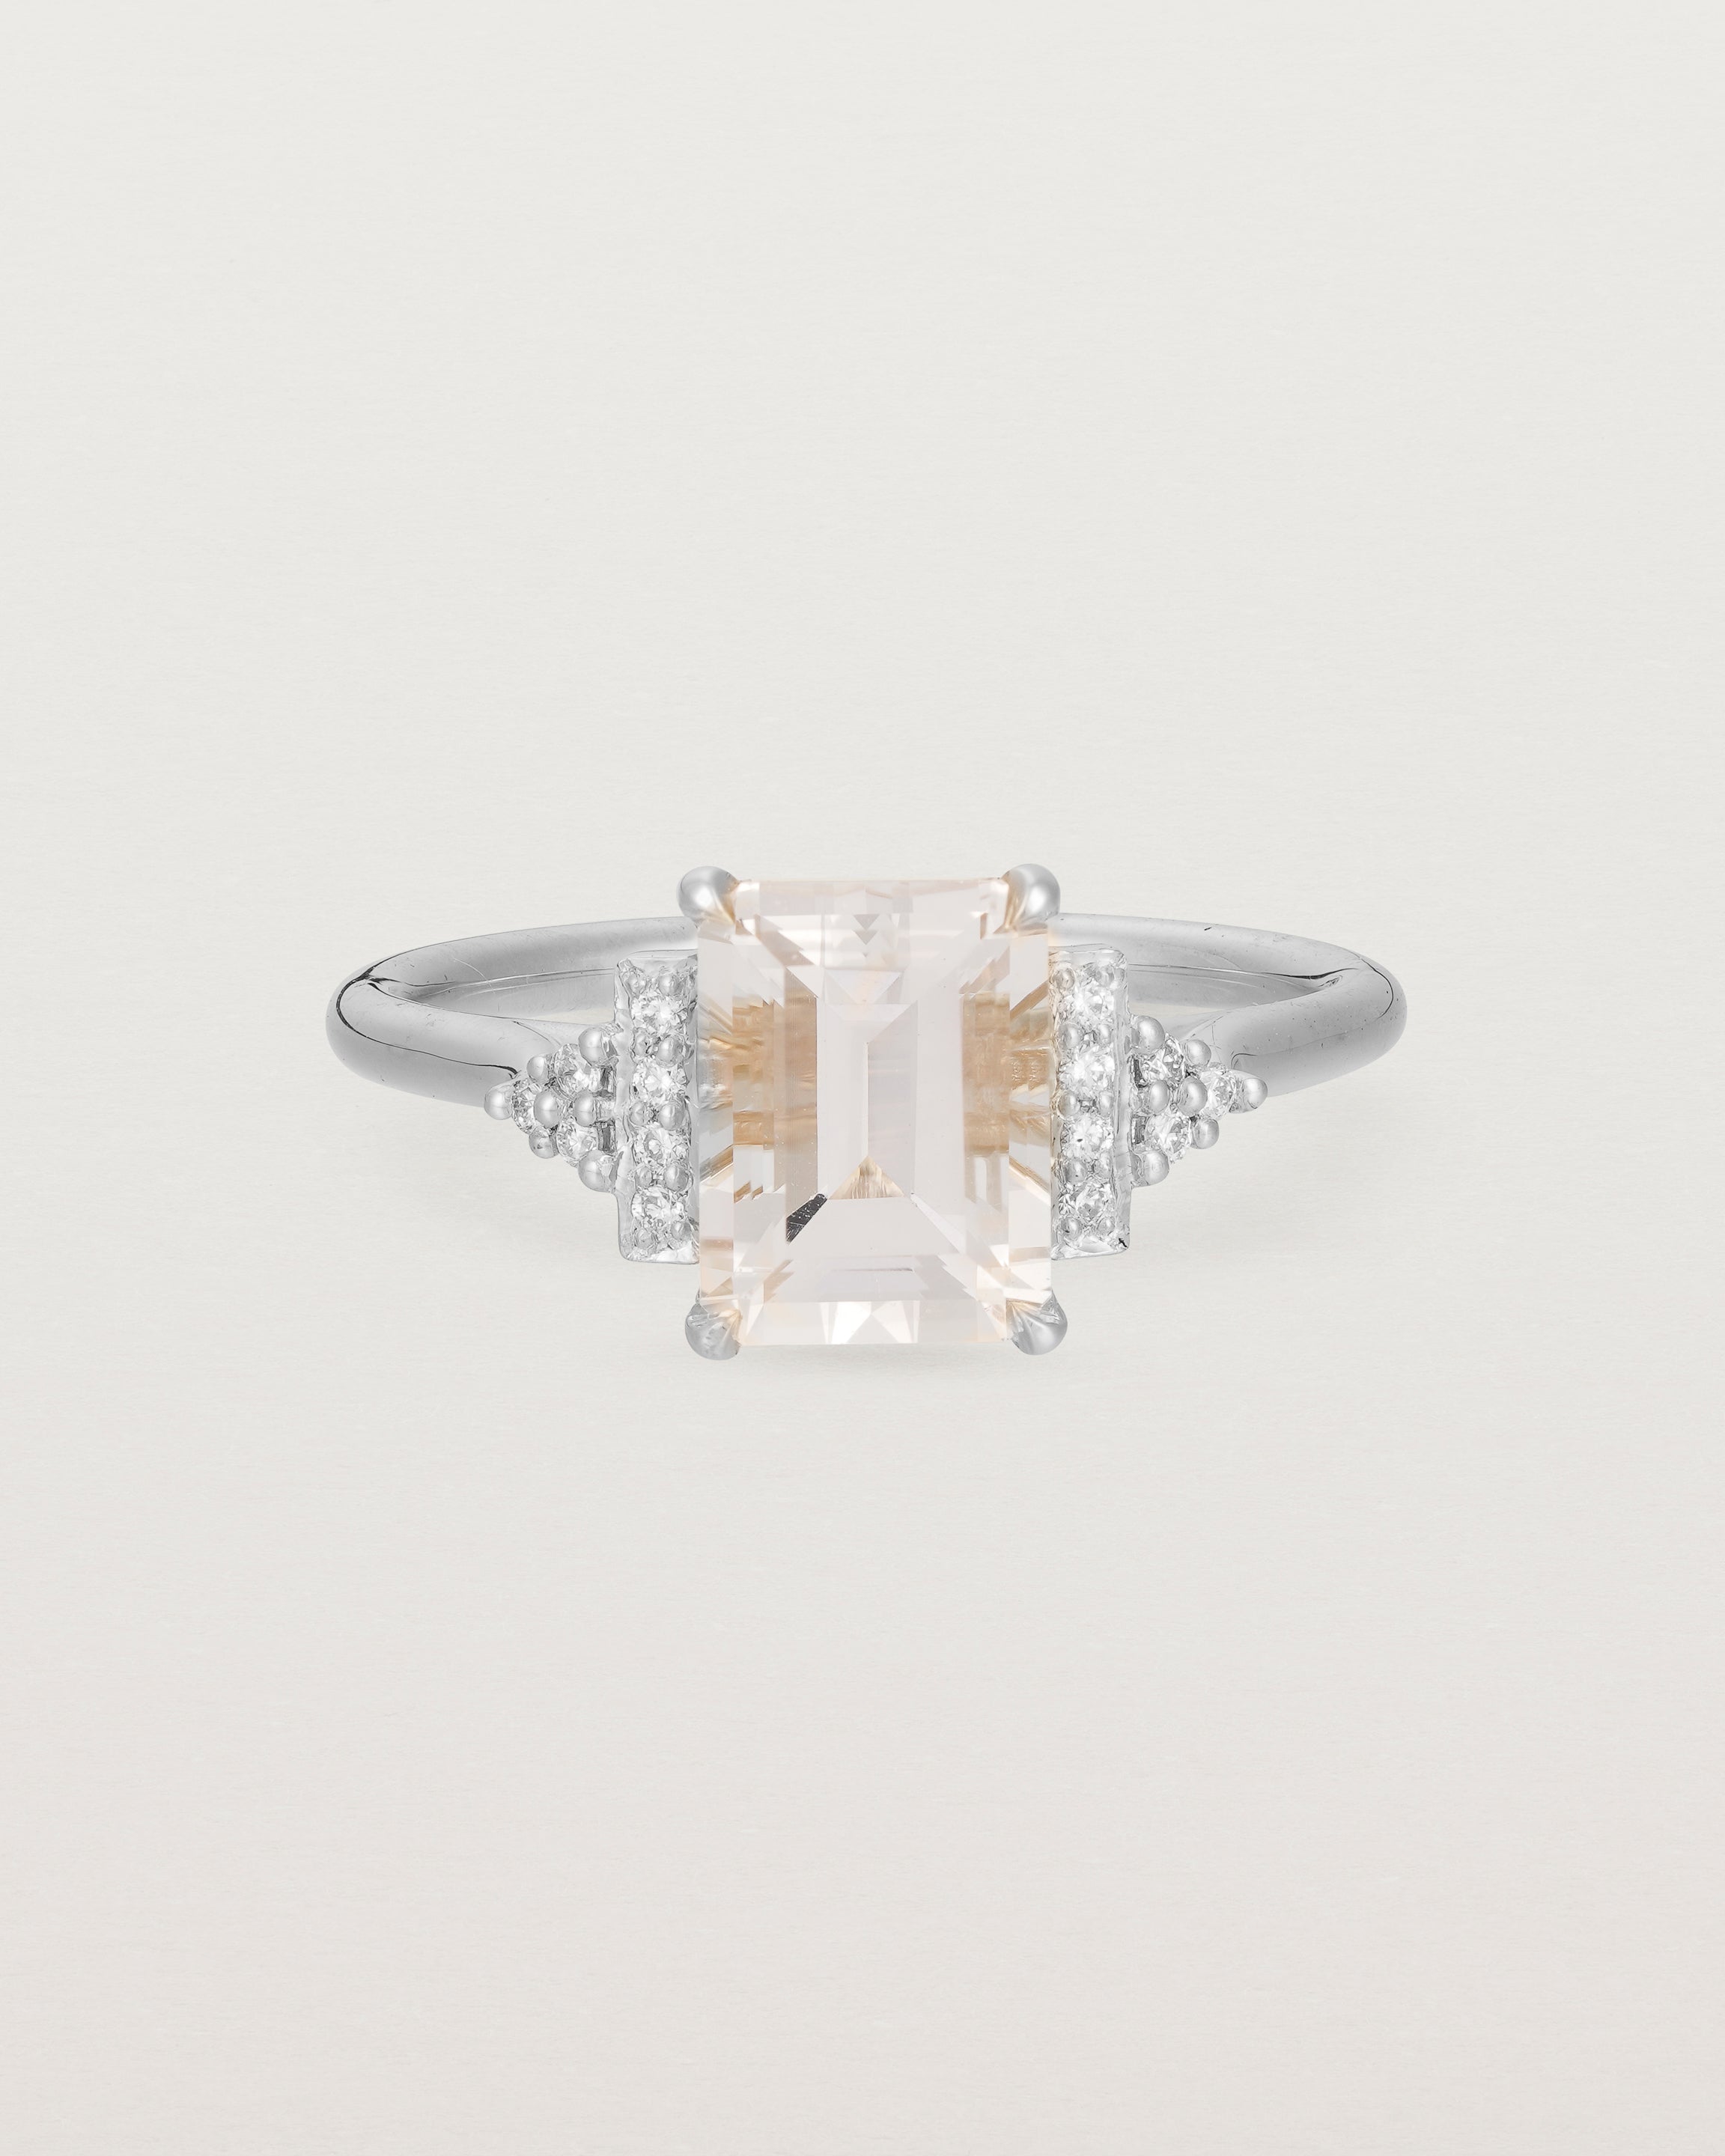 Front view of the Elodie Ring featuring a pale pink emerald cut morganite in white gold